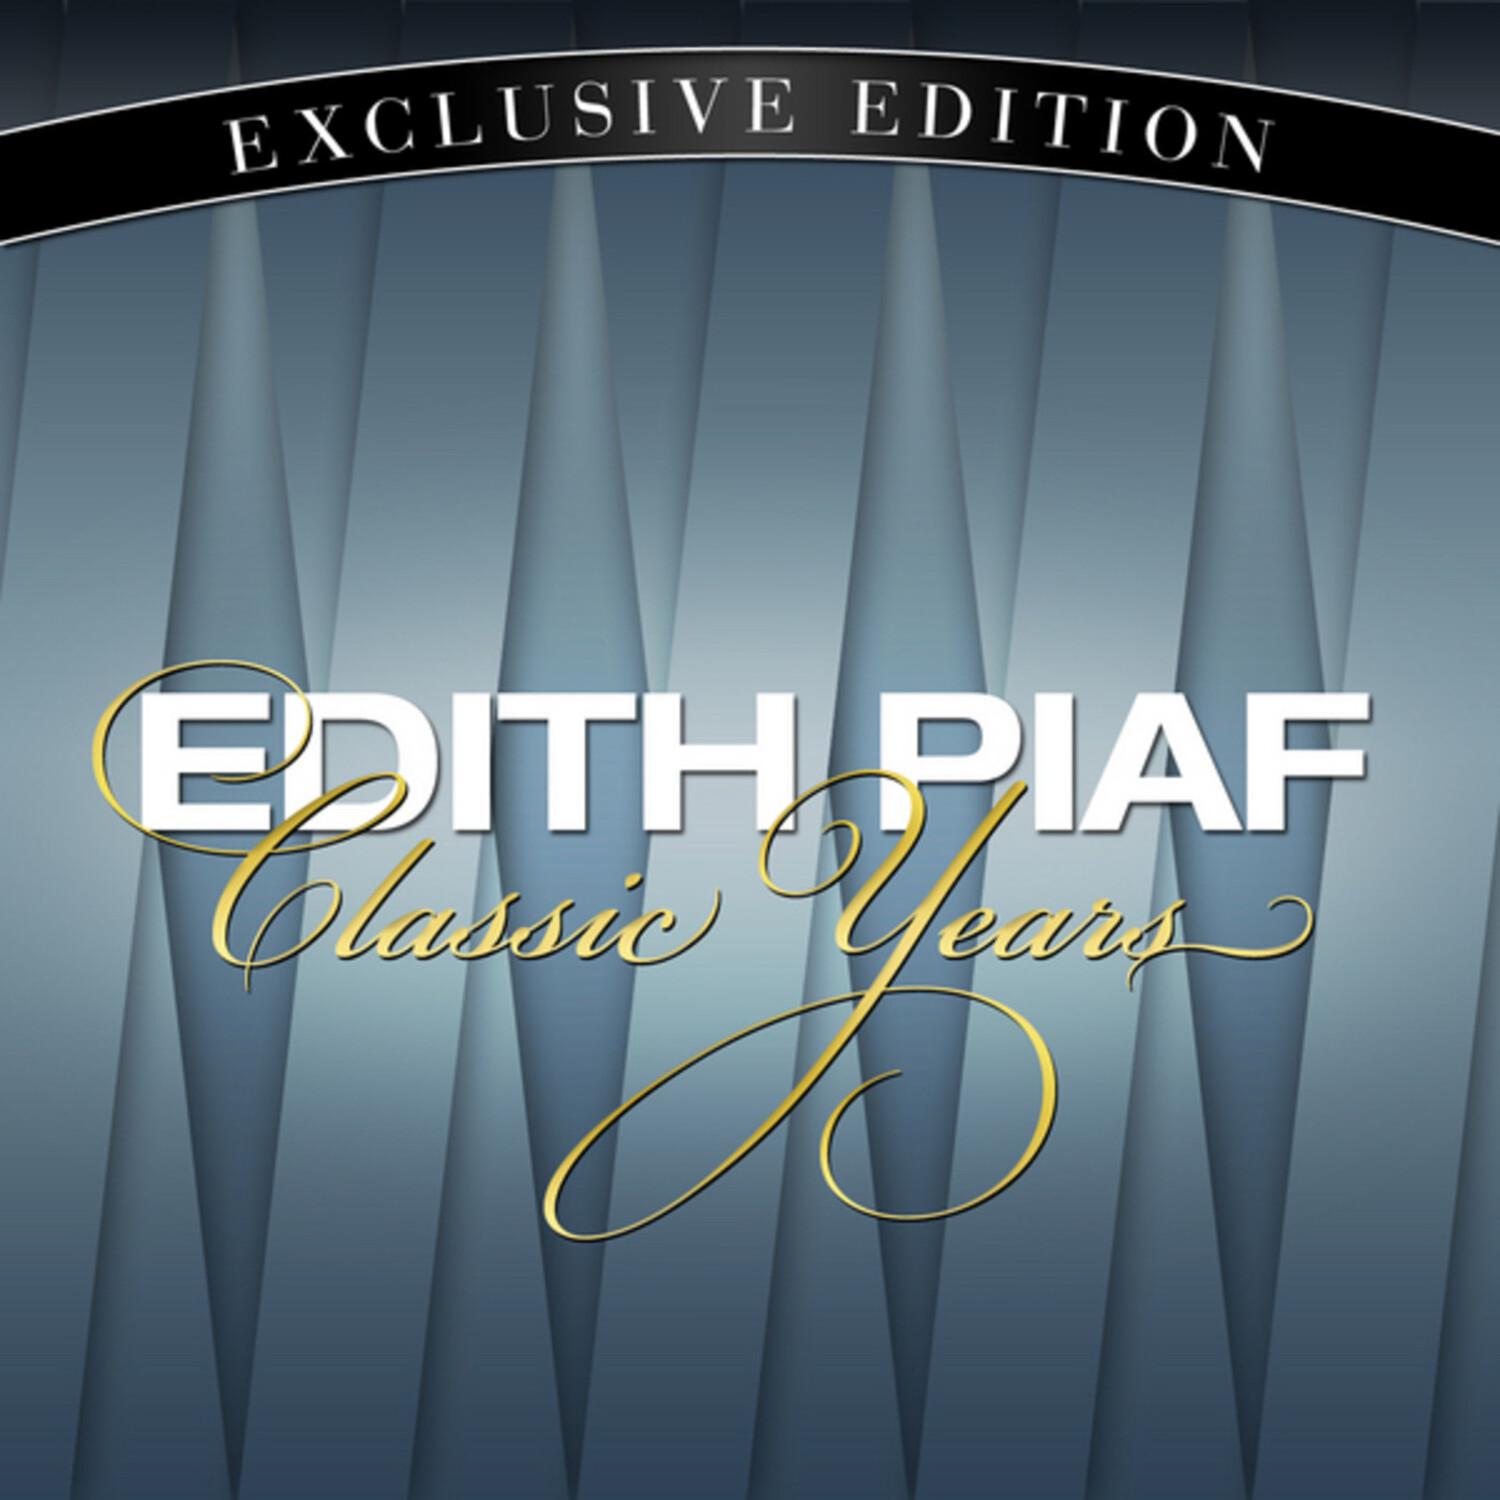 The Classic Years Of Edith Piaf